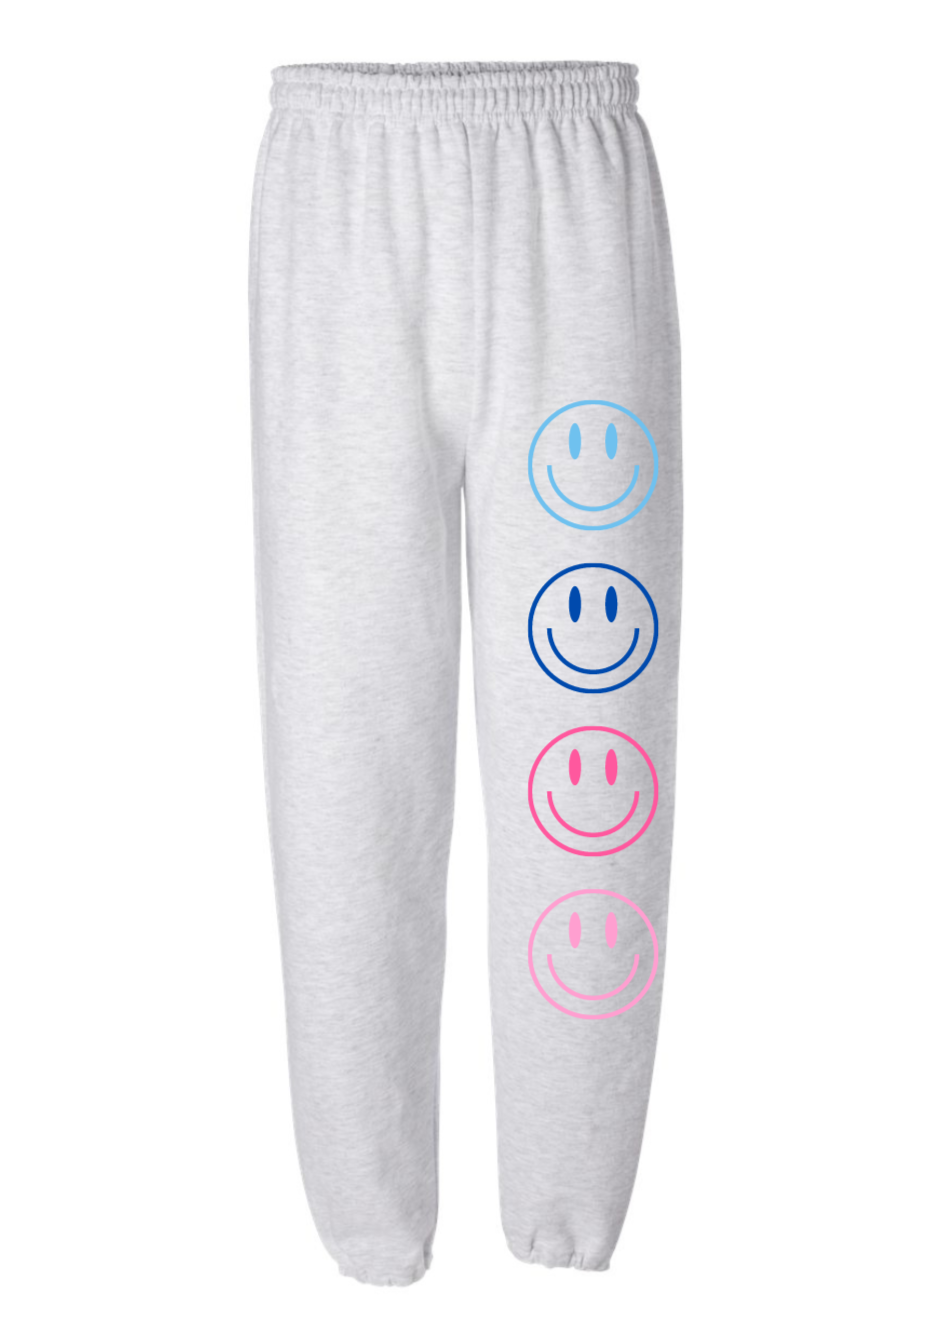 grey+pink smiley jogger style sweatpants